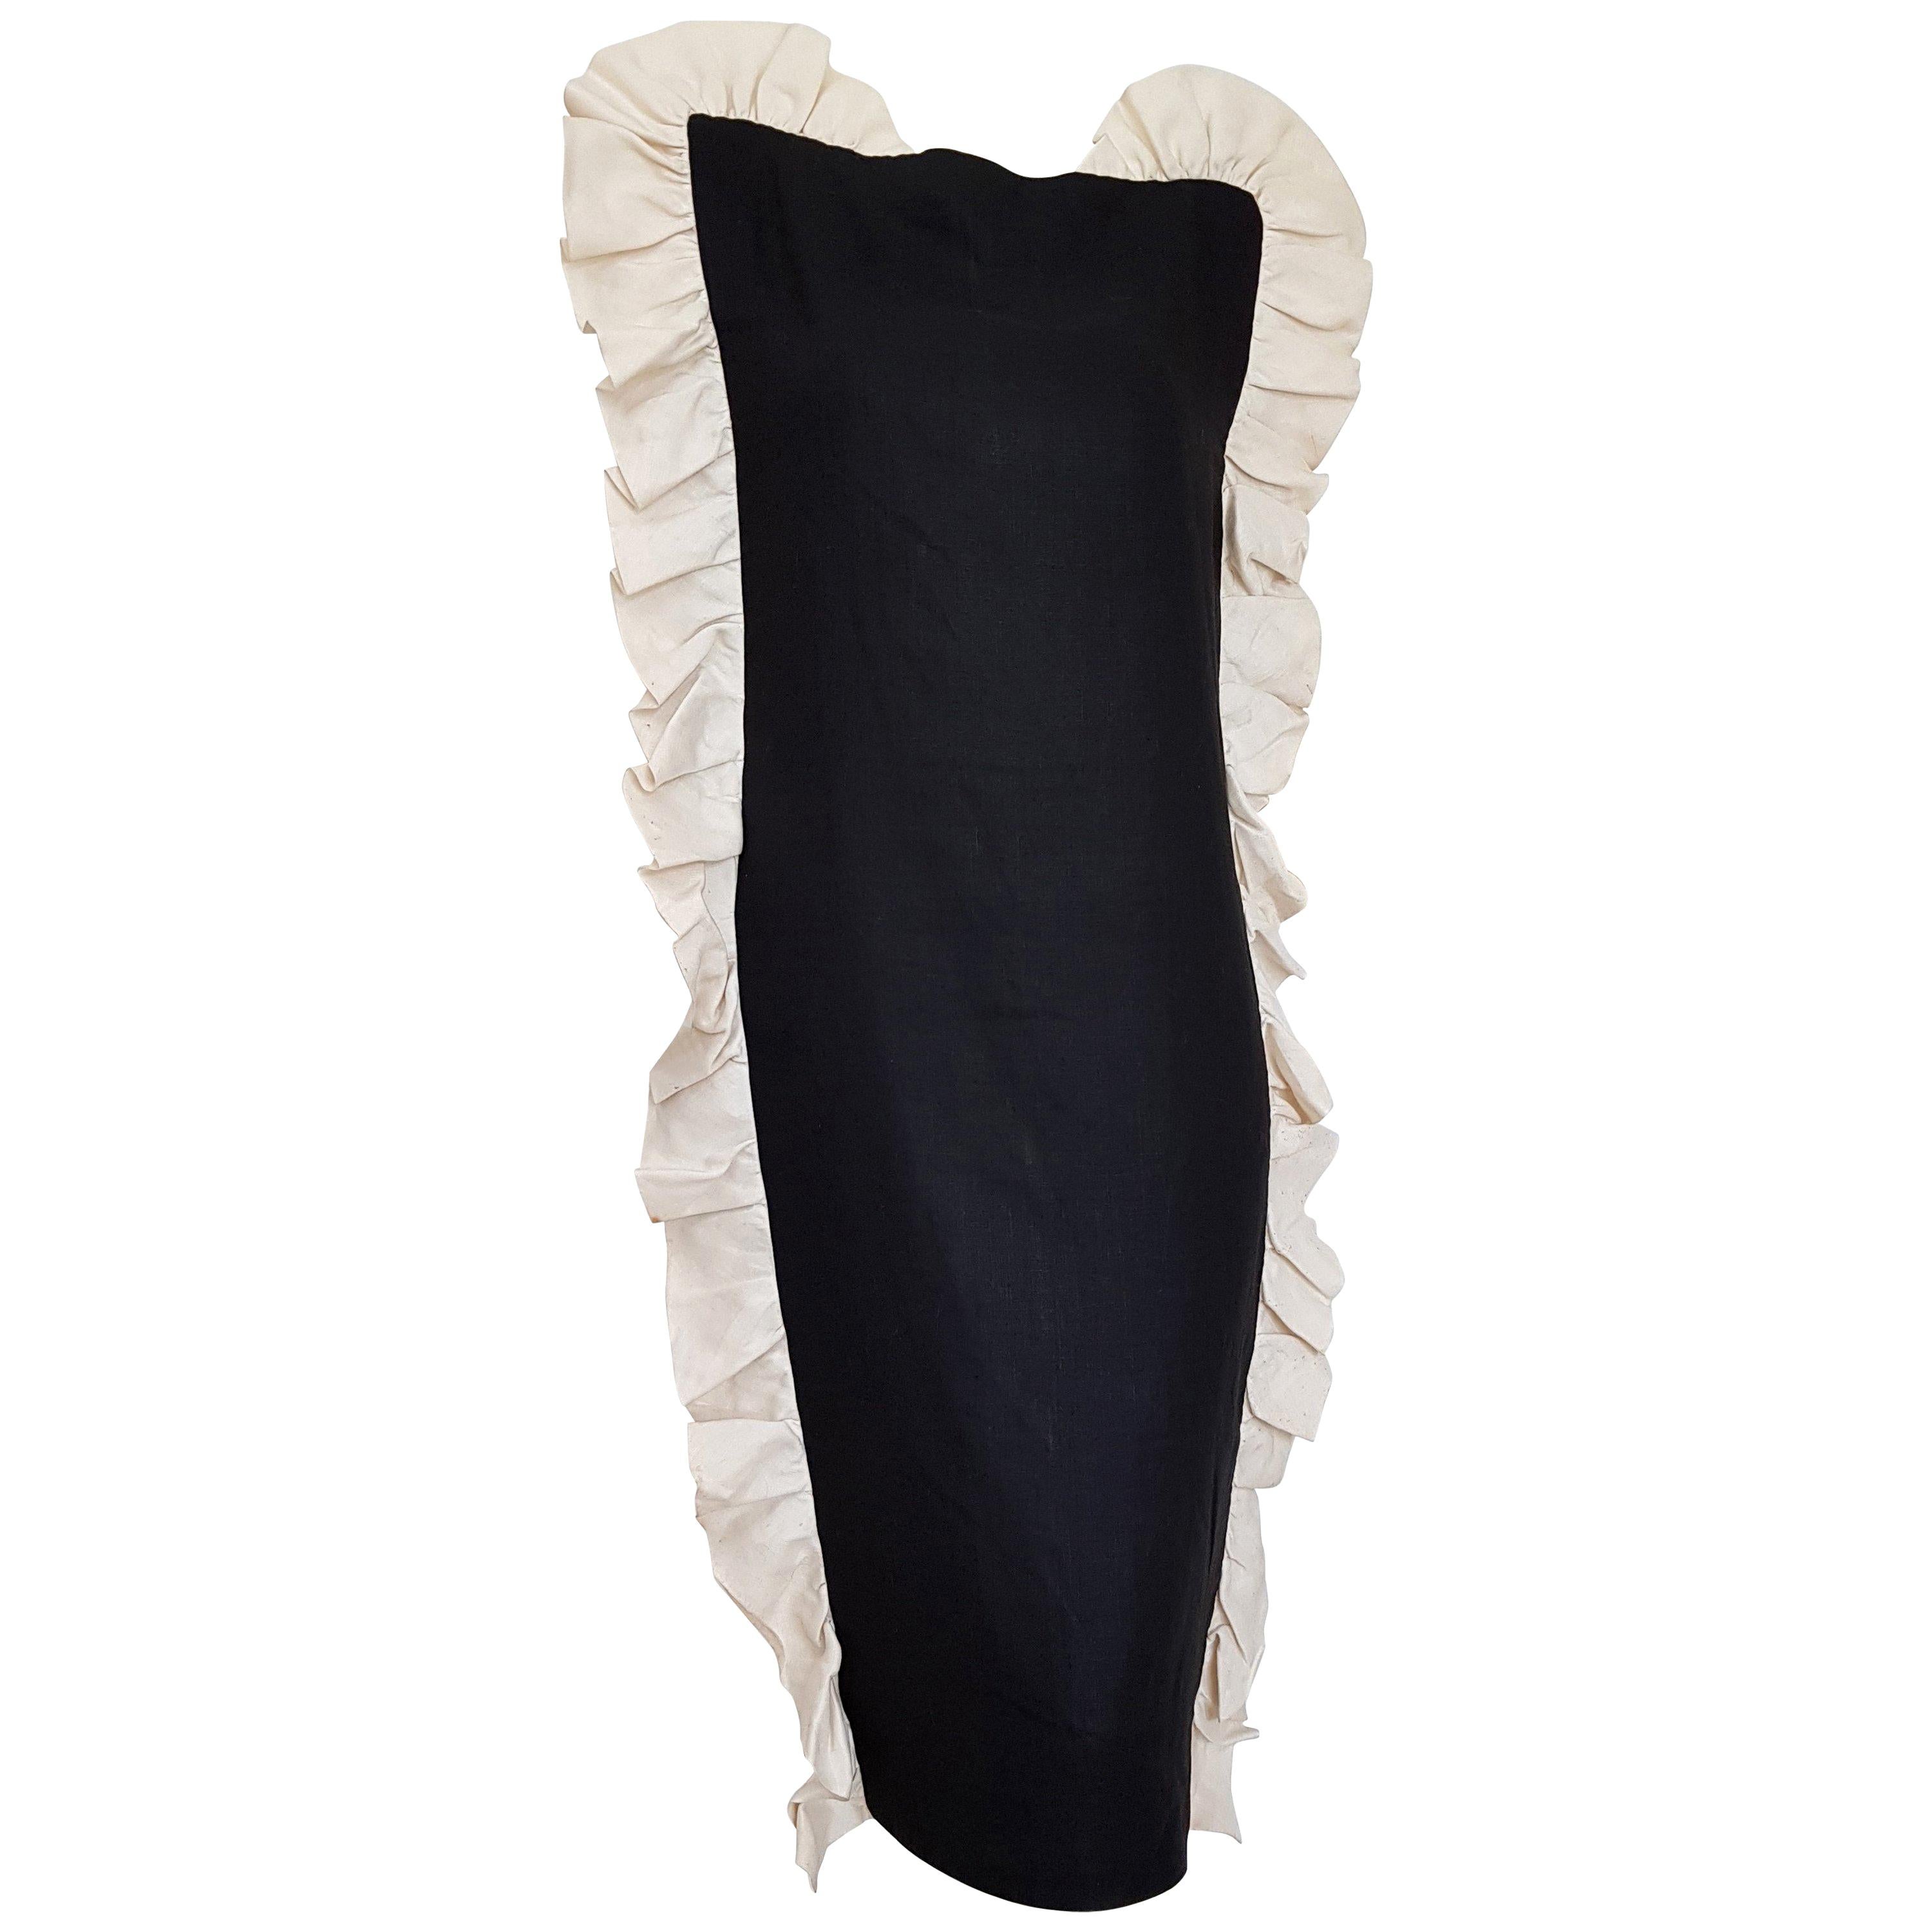 VALENTINO black with vertical wavy white edges, linen and silk dress - Unworn, New.
..
SIZE: equivalent to about Small / Medium, please review approx measurements as follows in cm: lenght 105, chest underarm to underarm 50, bust circumference 90,